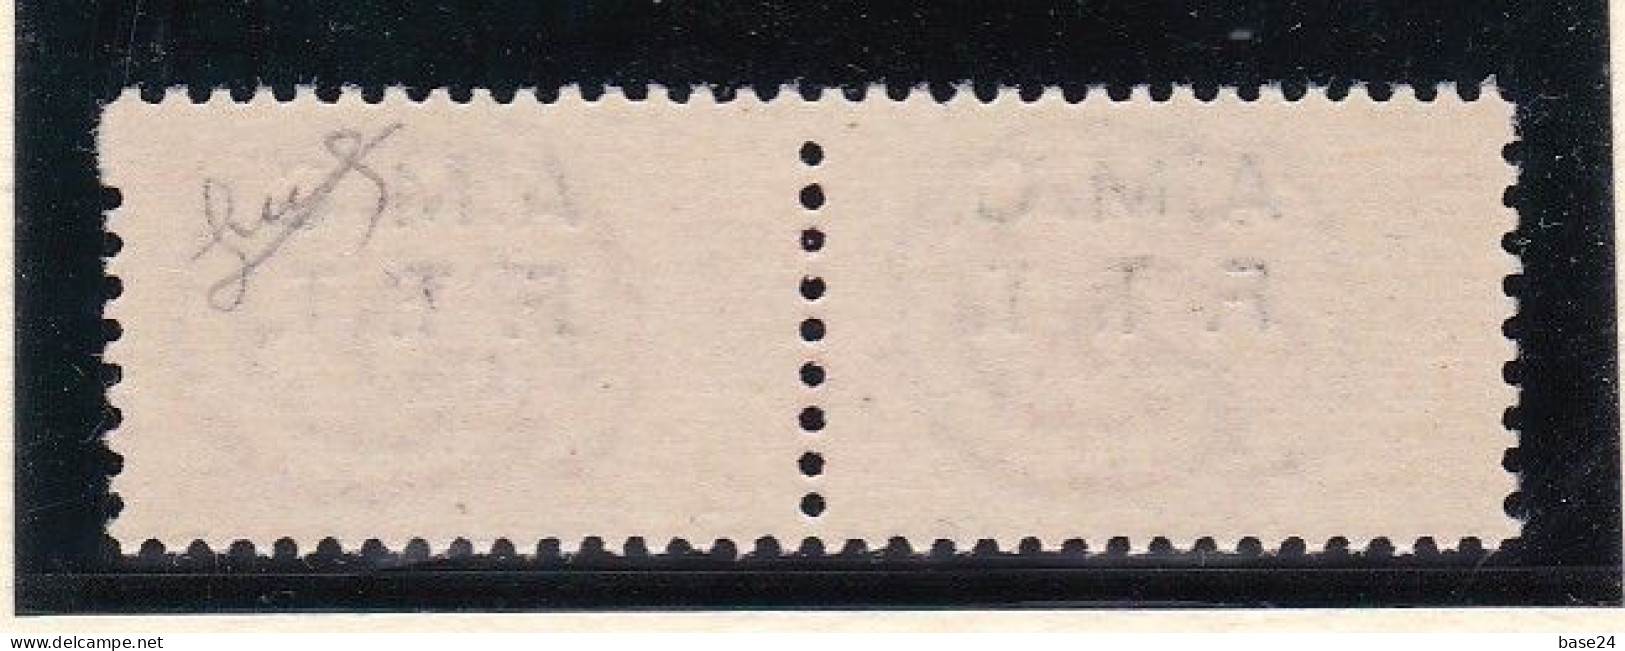 1947 Italia Italy Trieste A  PACCHI POSTALI 50 Lire Rosso Varietà 8g Sovrastampa Spostata MNH** Firma Biondi Parcel Post - Postal And Consigned Parcels